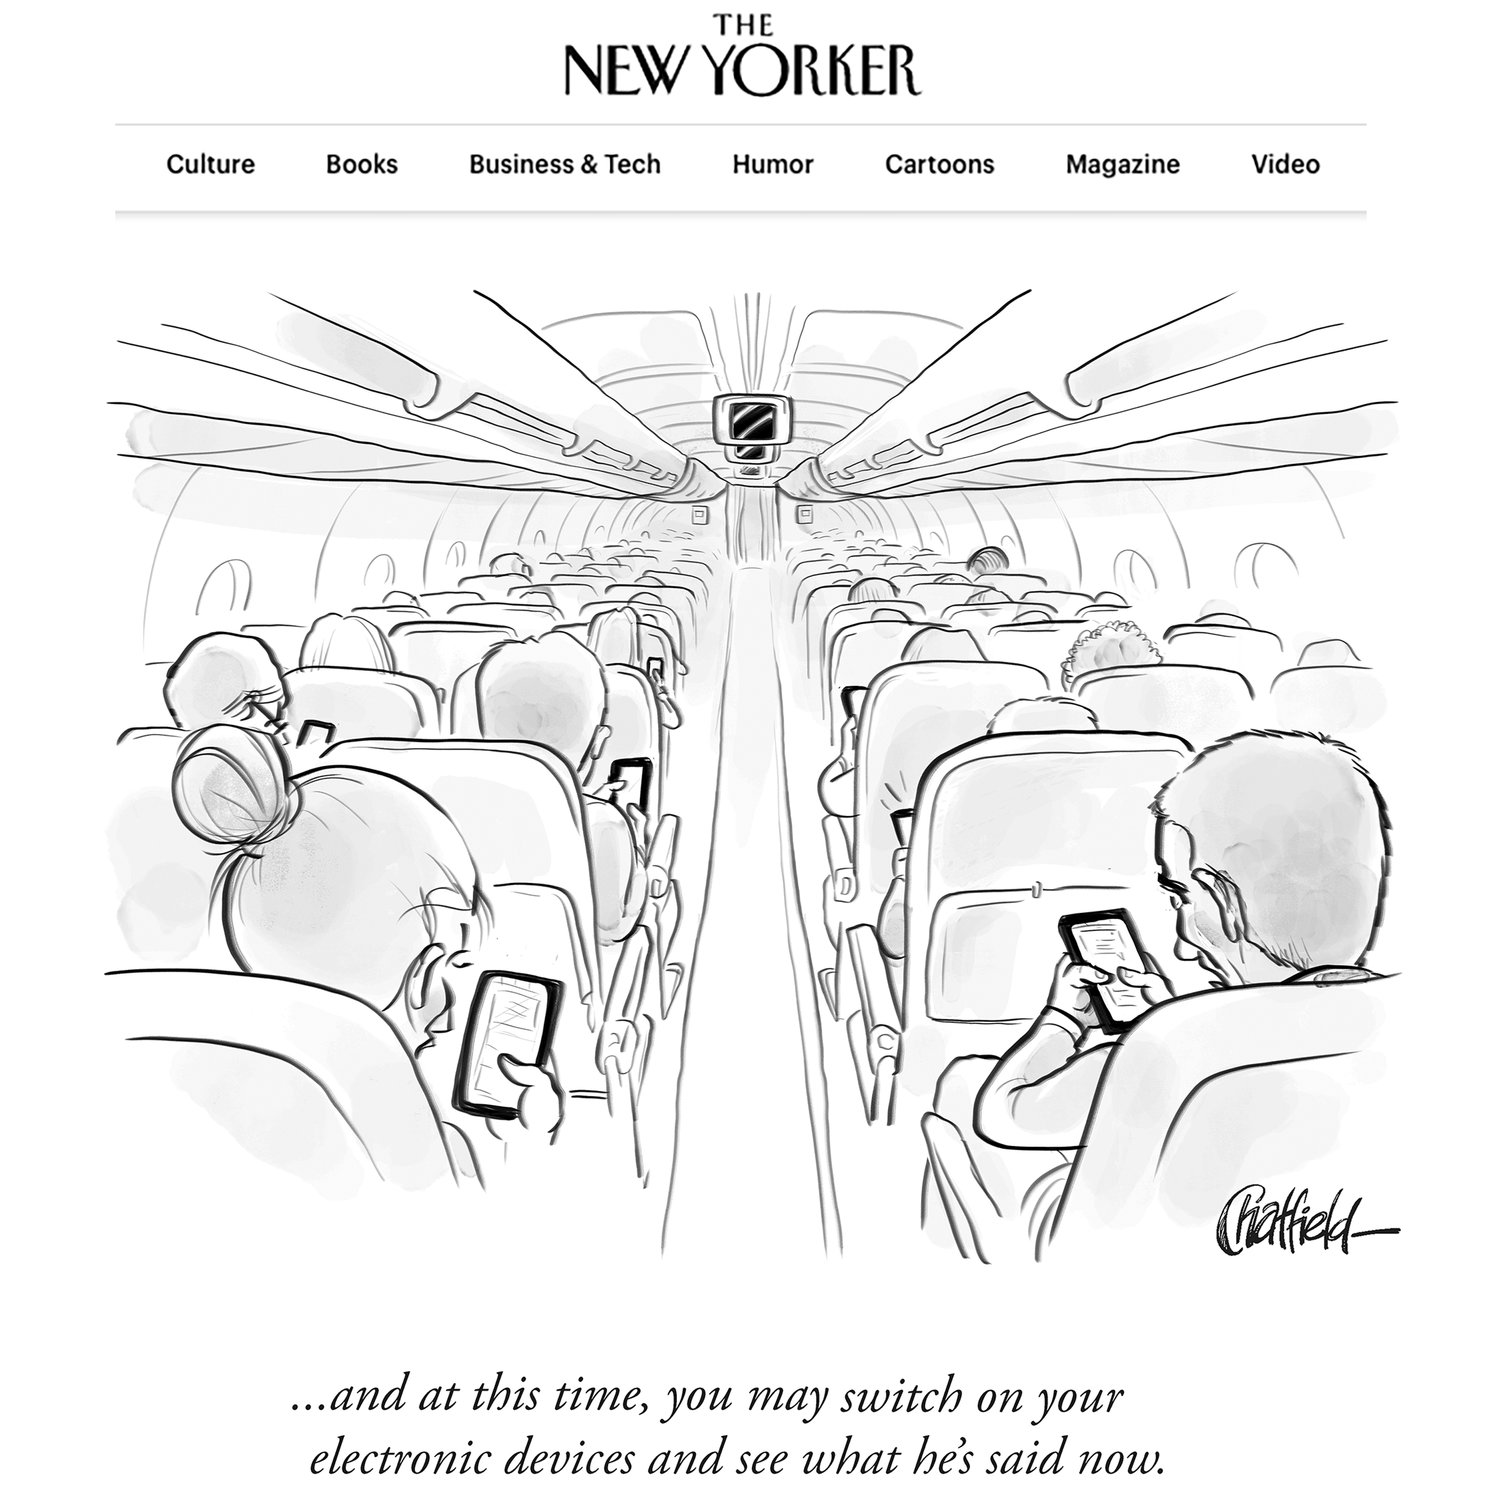 Today's New Yorker Daily Cartoon: See what he's said now... - New Yorker  Cartoonist Jason Chatfield